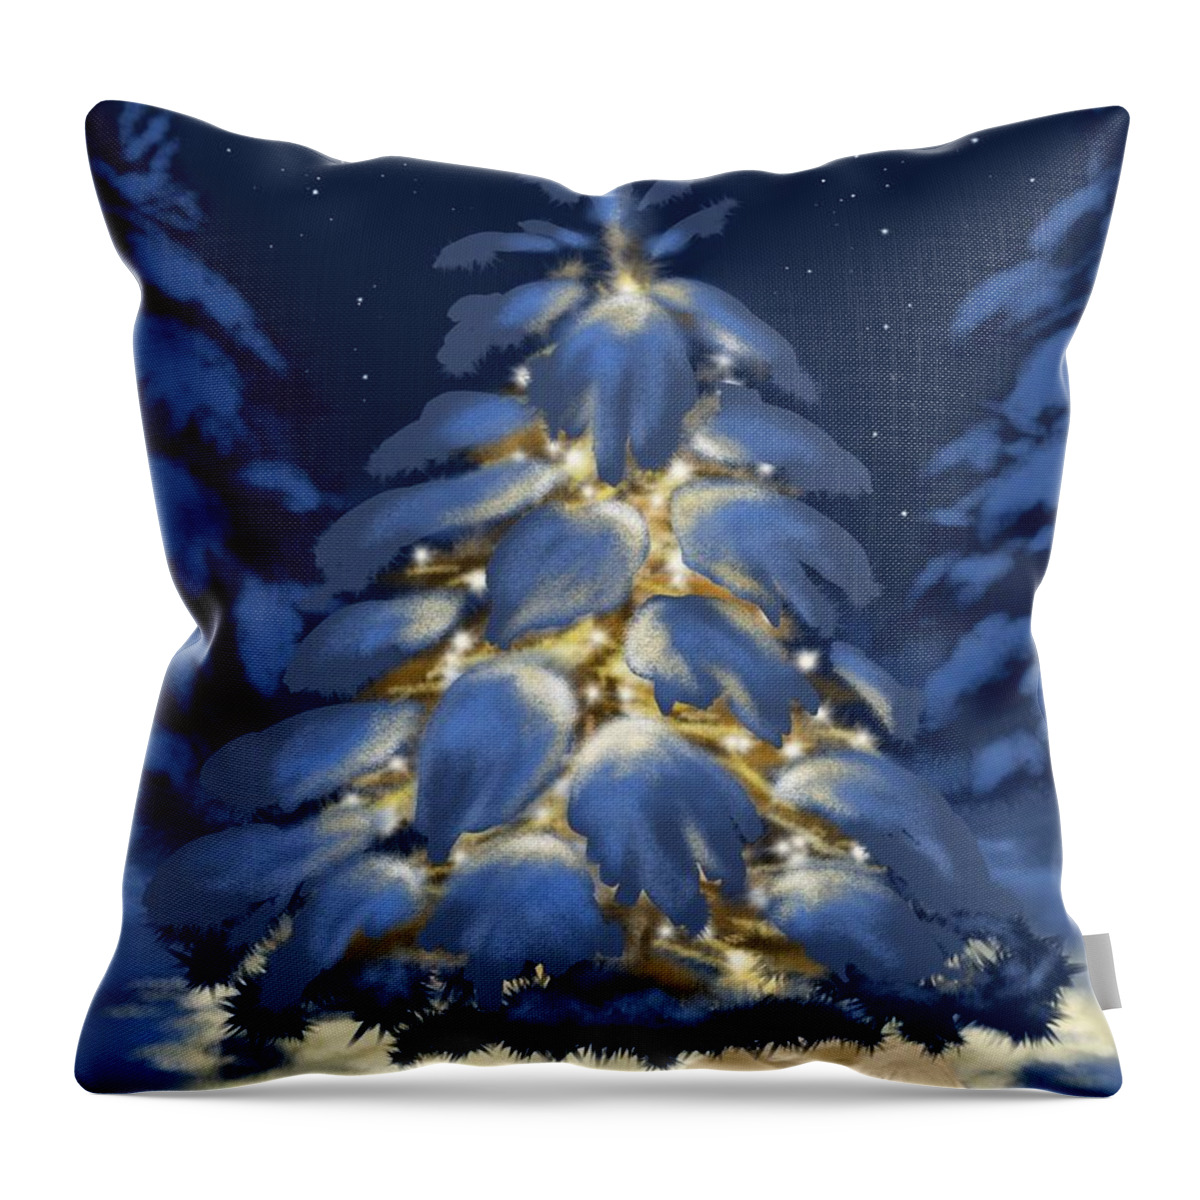 Christmas Throw Pillow featuring the painting Holding together by Veronica Minozzi